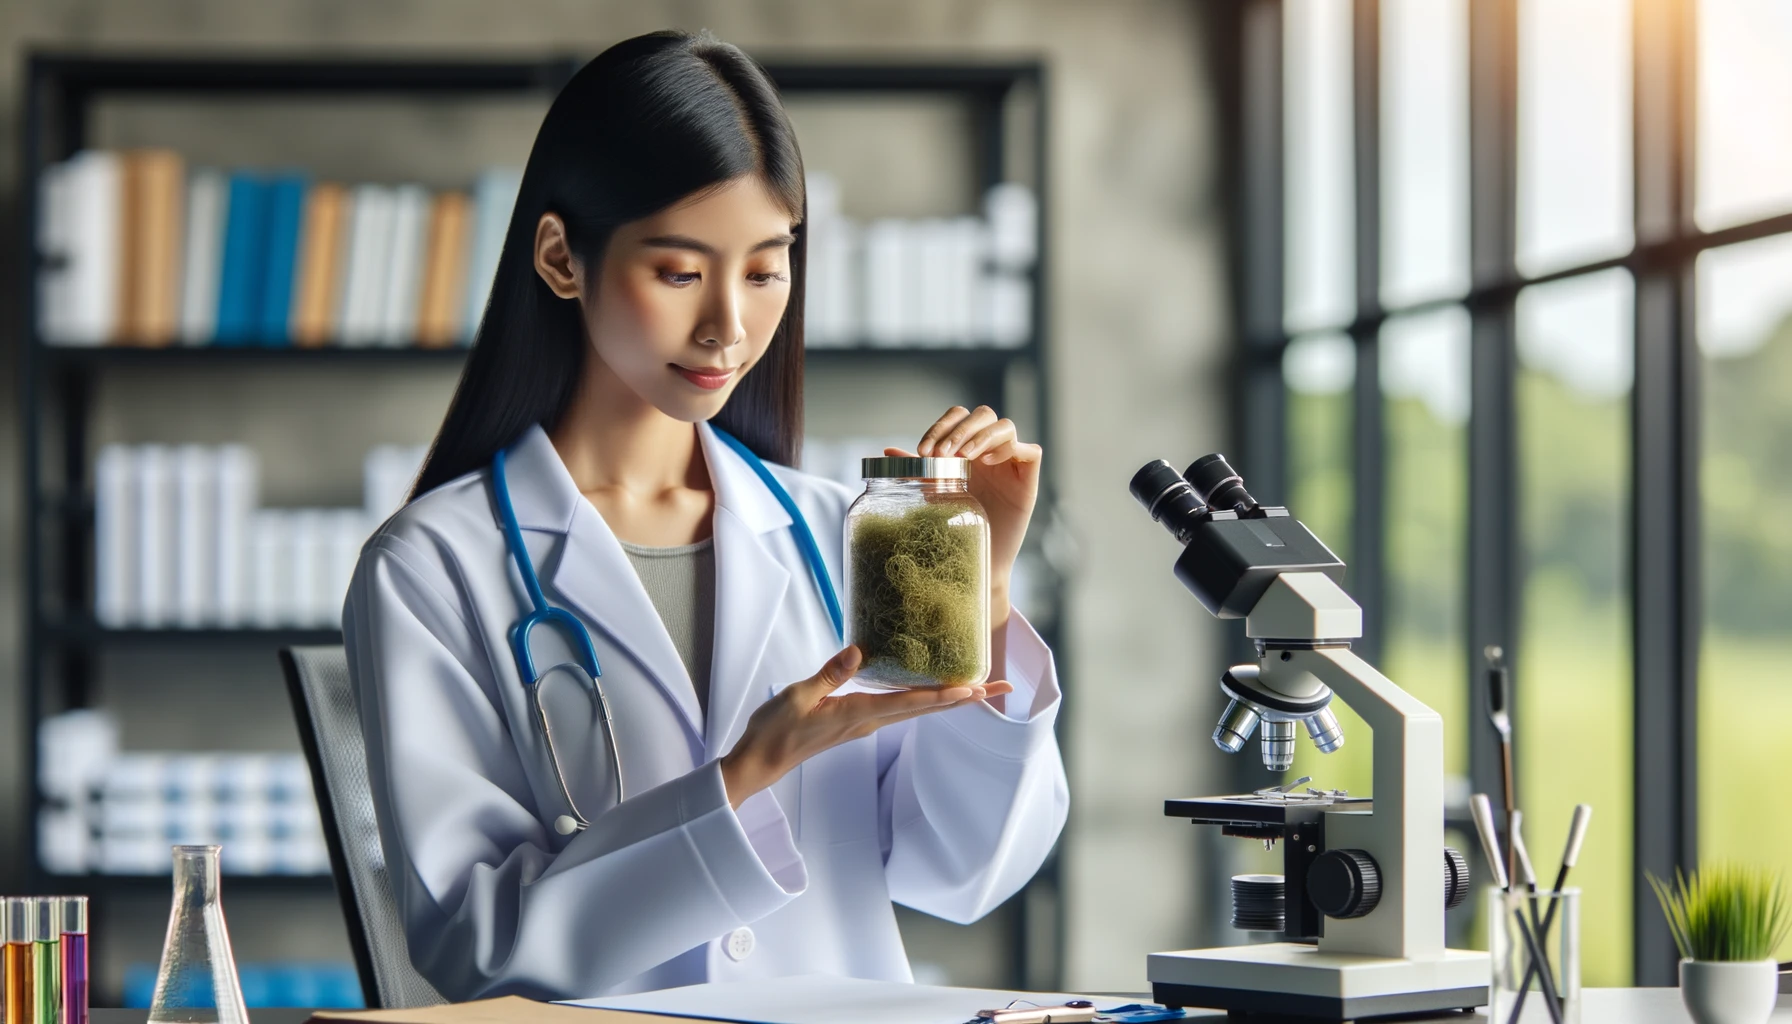 Healthcare professional analyzing Irish Moss in a lab setting, surrounded by scientific equipment and journals.